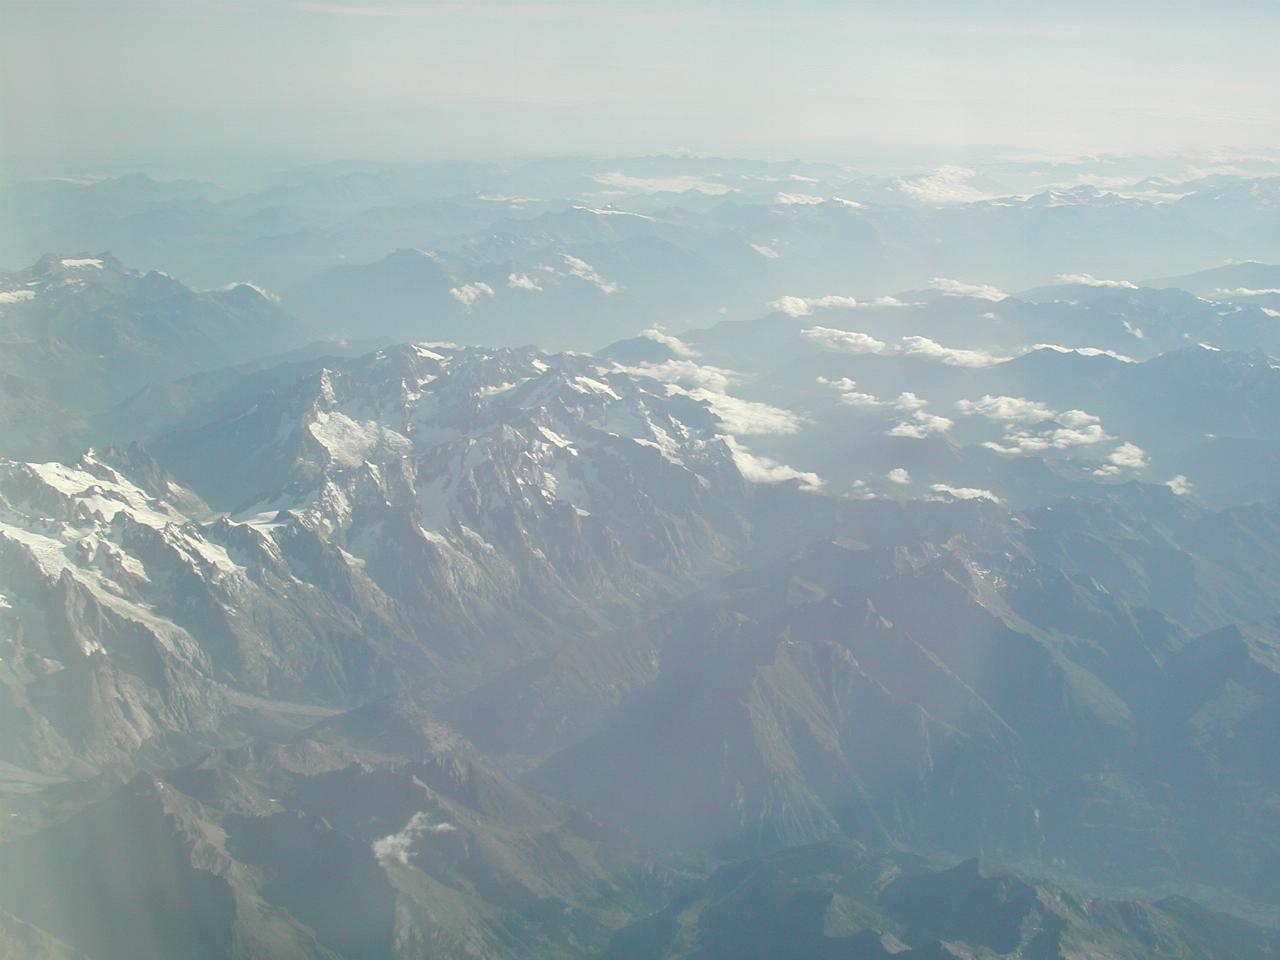 Alps, from Air Canada flight from Toronto to Rome